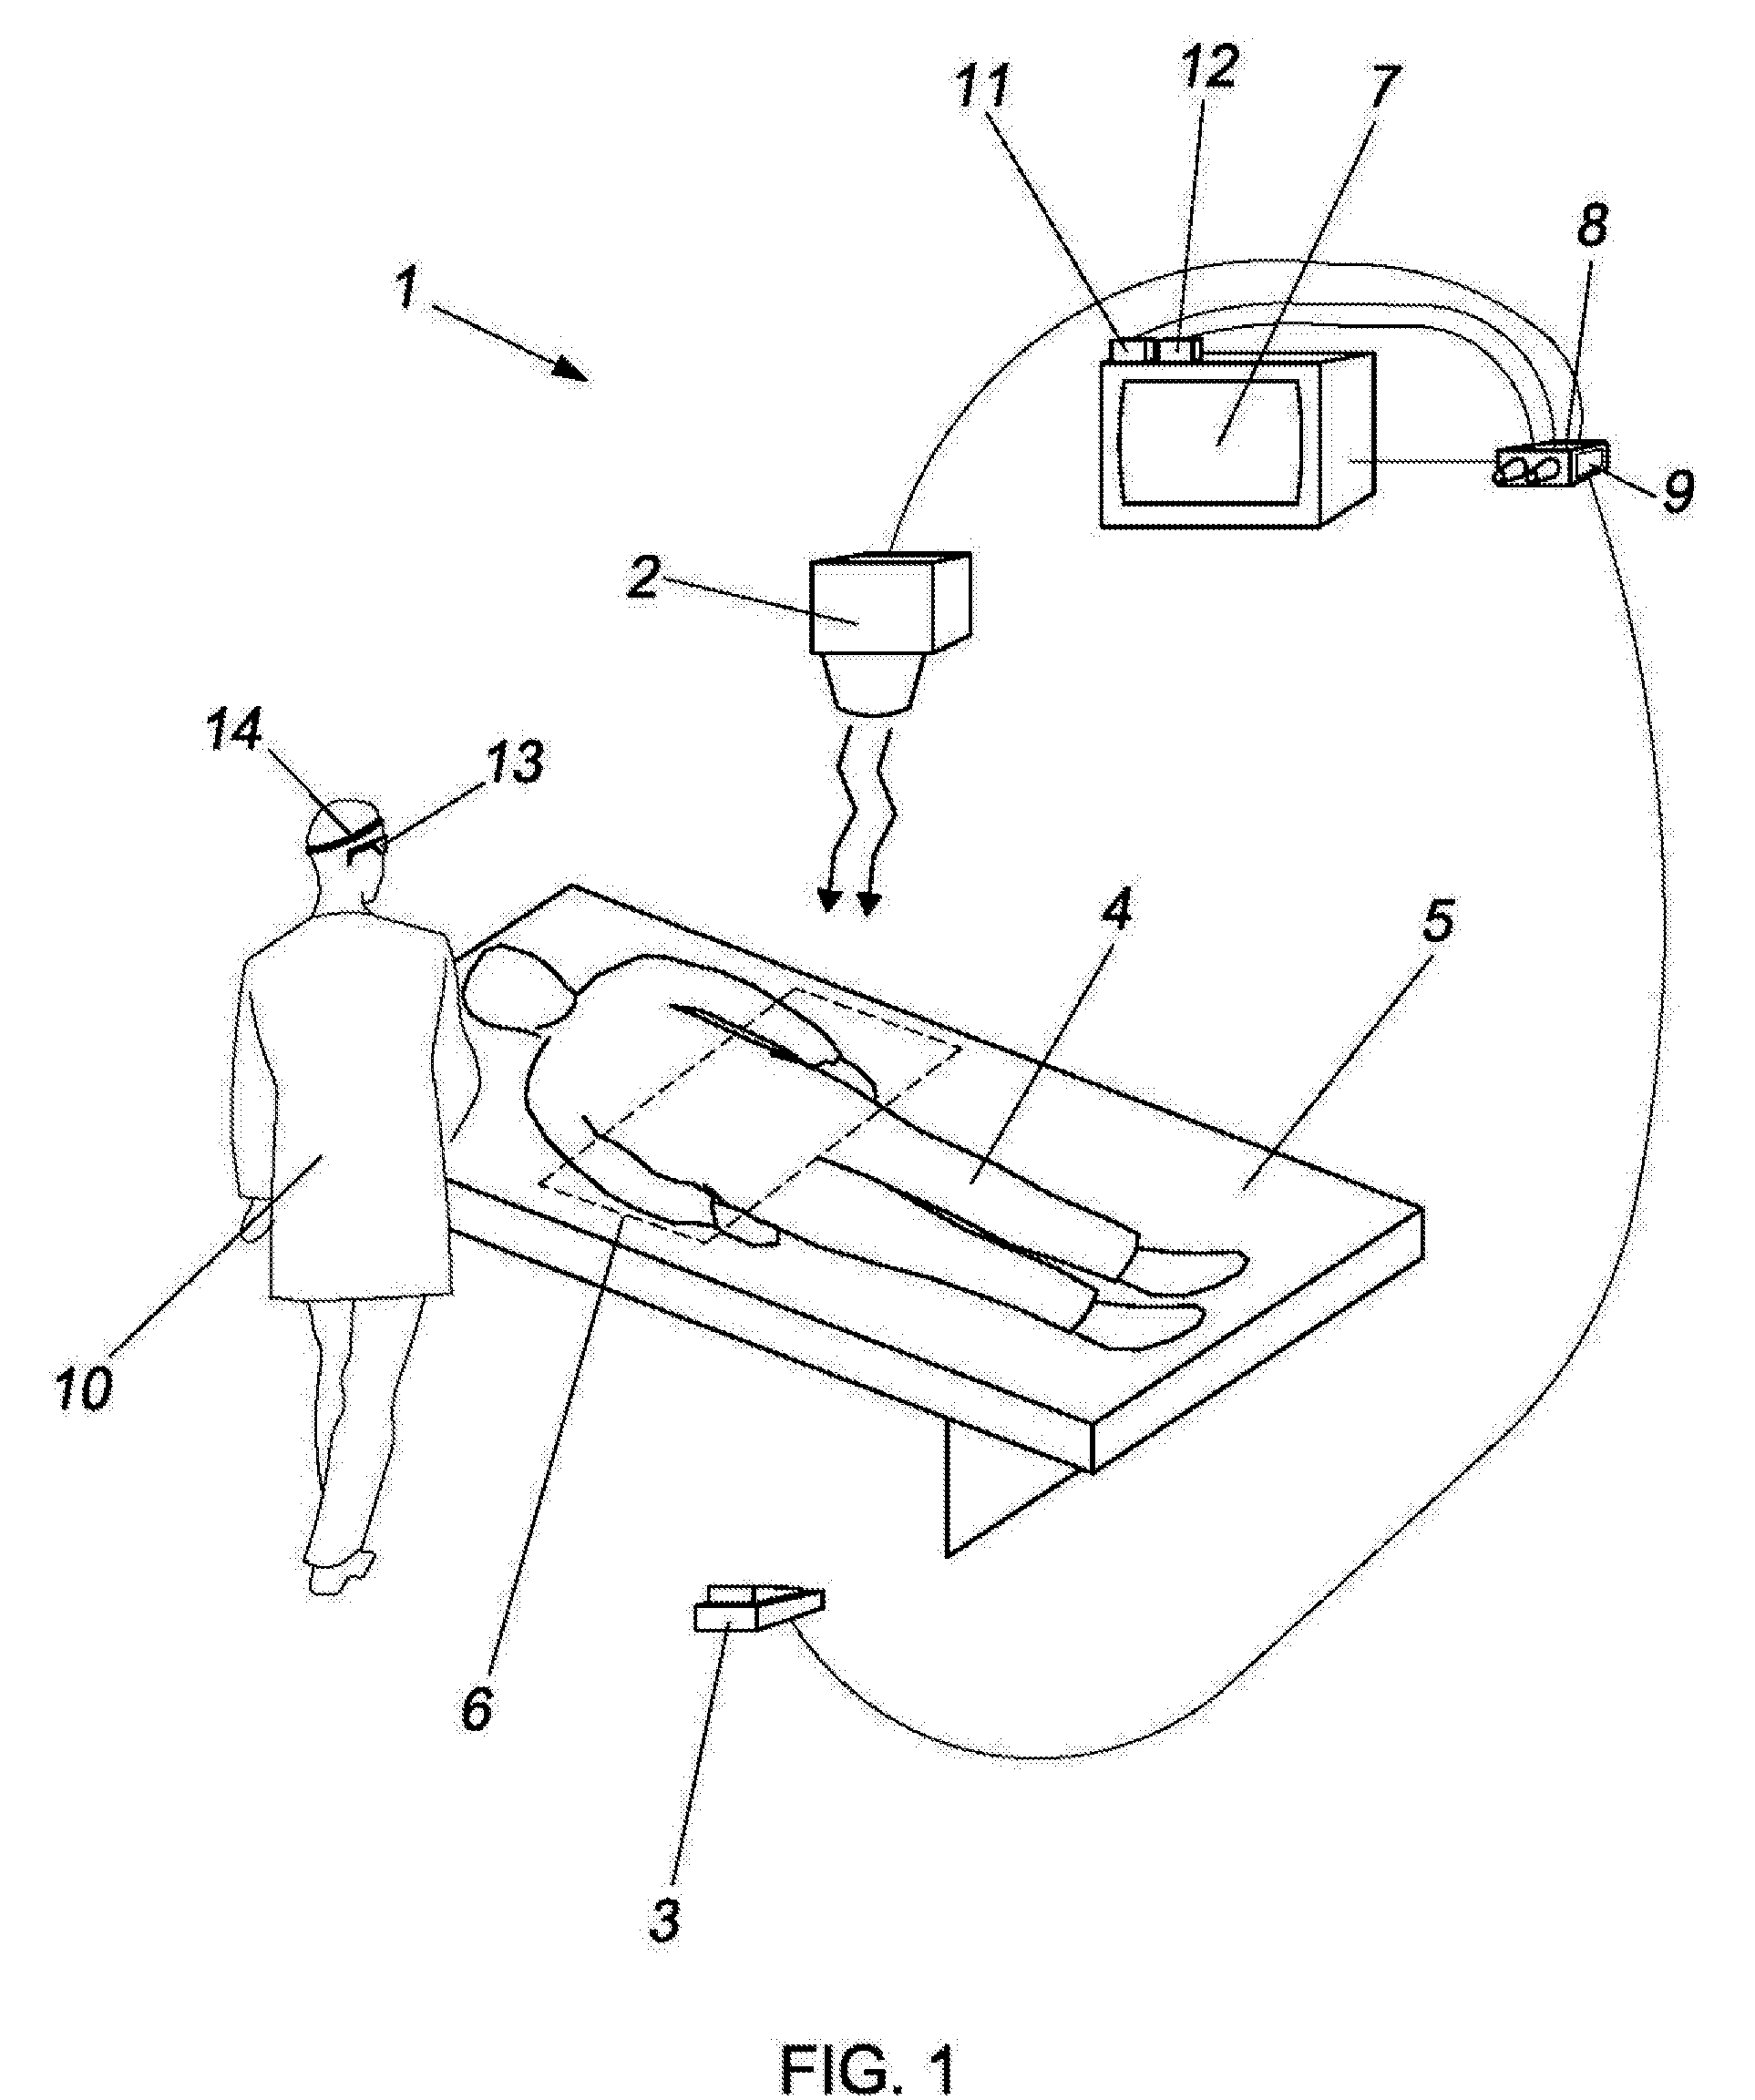 Automatic Control of a Medical Device